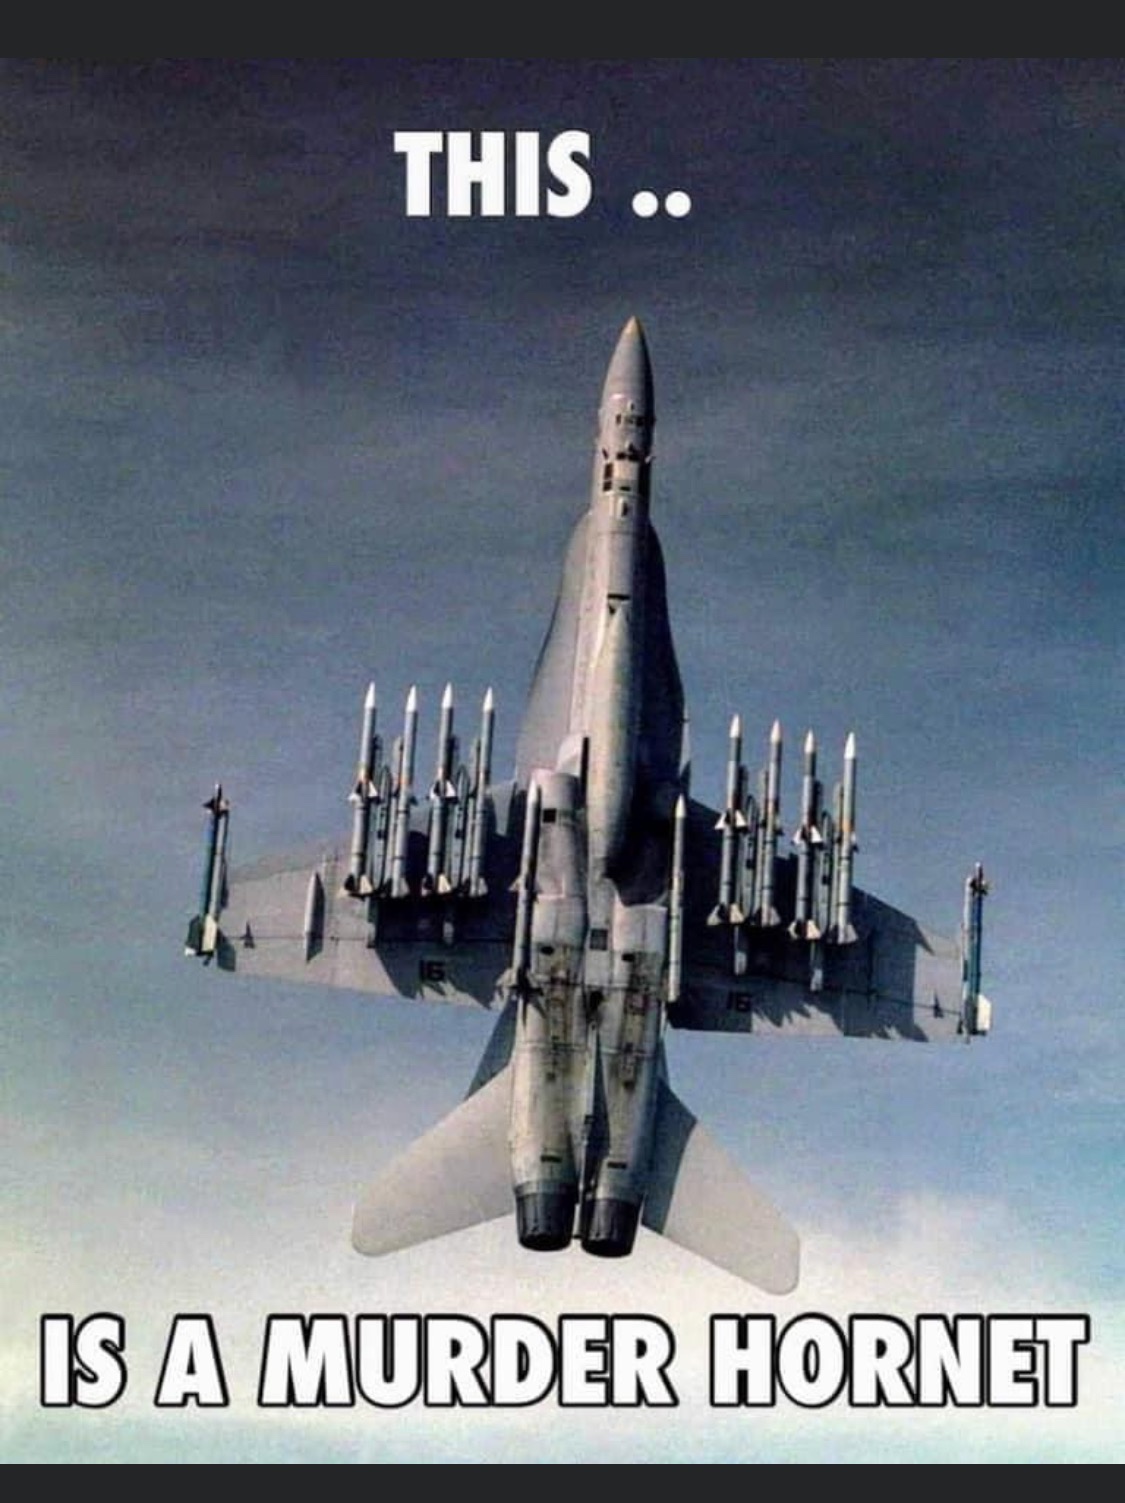 fighter jet fully armed - This .. Is A Murder Hornet